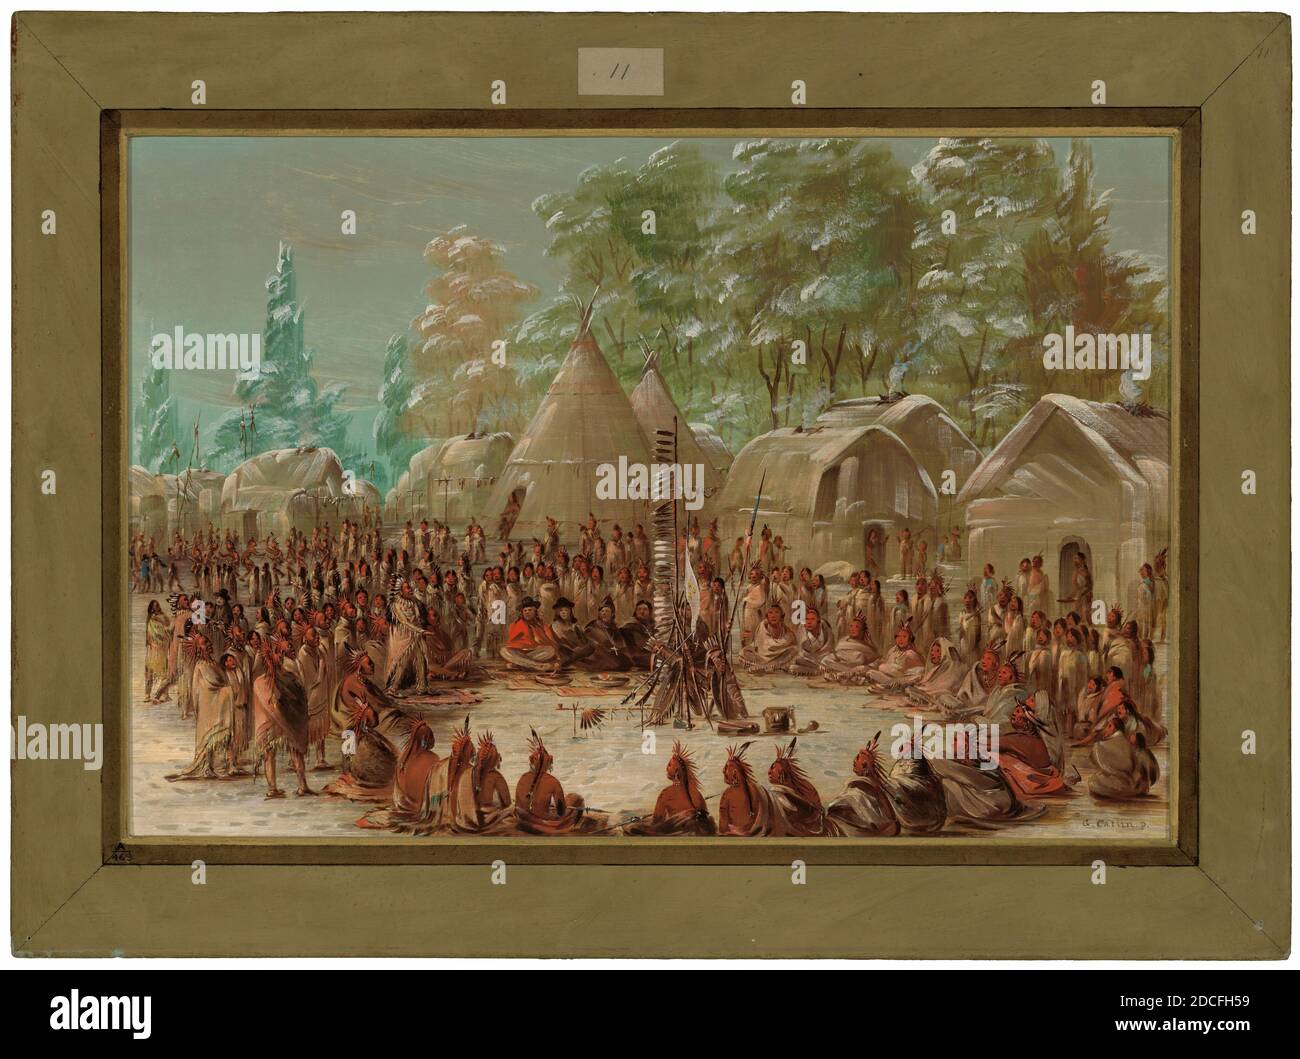 George Catlin, (artist), American, 1796 - 1872, La Salle's Party Feasted in the Illinois Village. January 2, 1680, 1847/1848, oil on canvas, overall: 42 x 60.5 cm (16 9/16 x 23 13/16 in Stock Photo